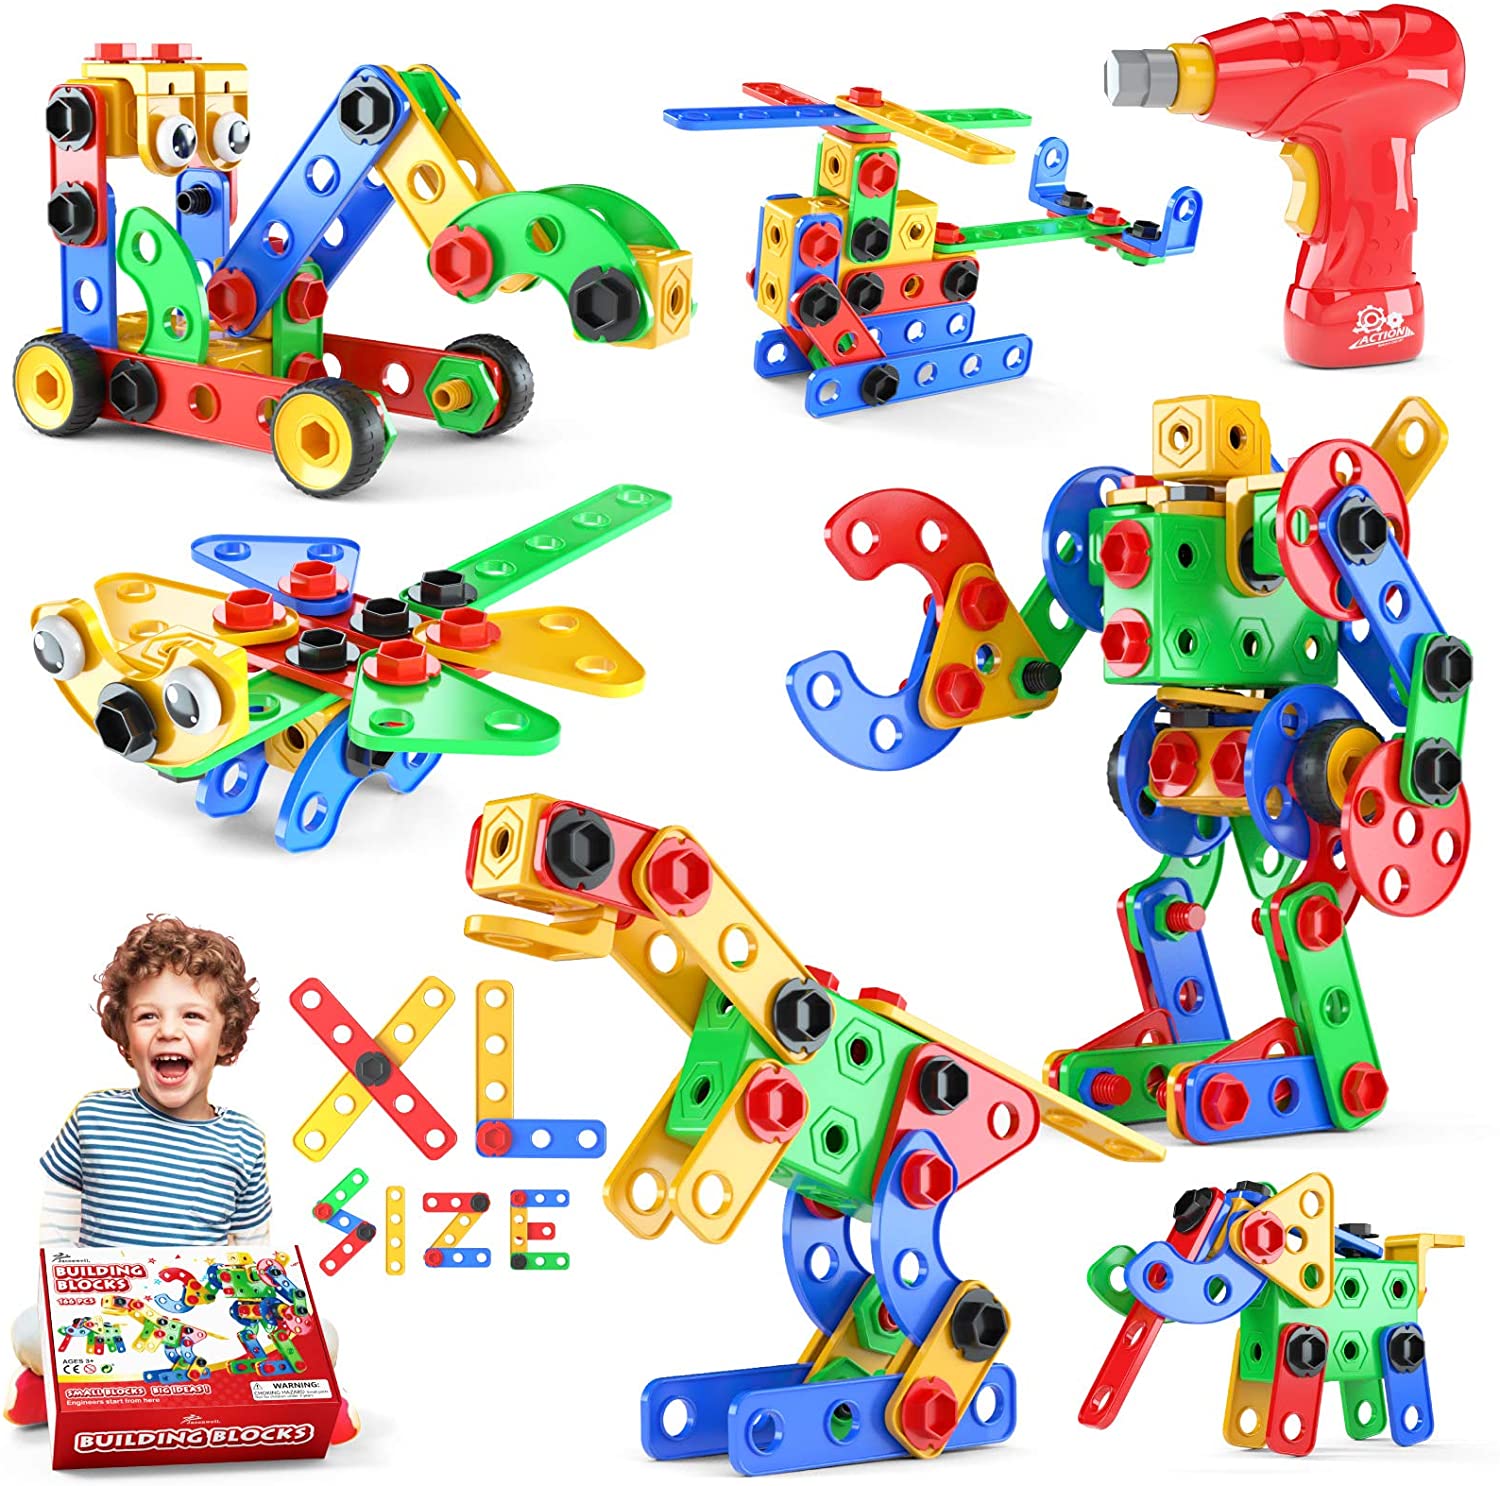 168 PCS Educational Construction Set Creative Engineering Toys Building Toys Kit Stem Activities Learning Gift for Kids $16.49